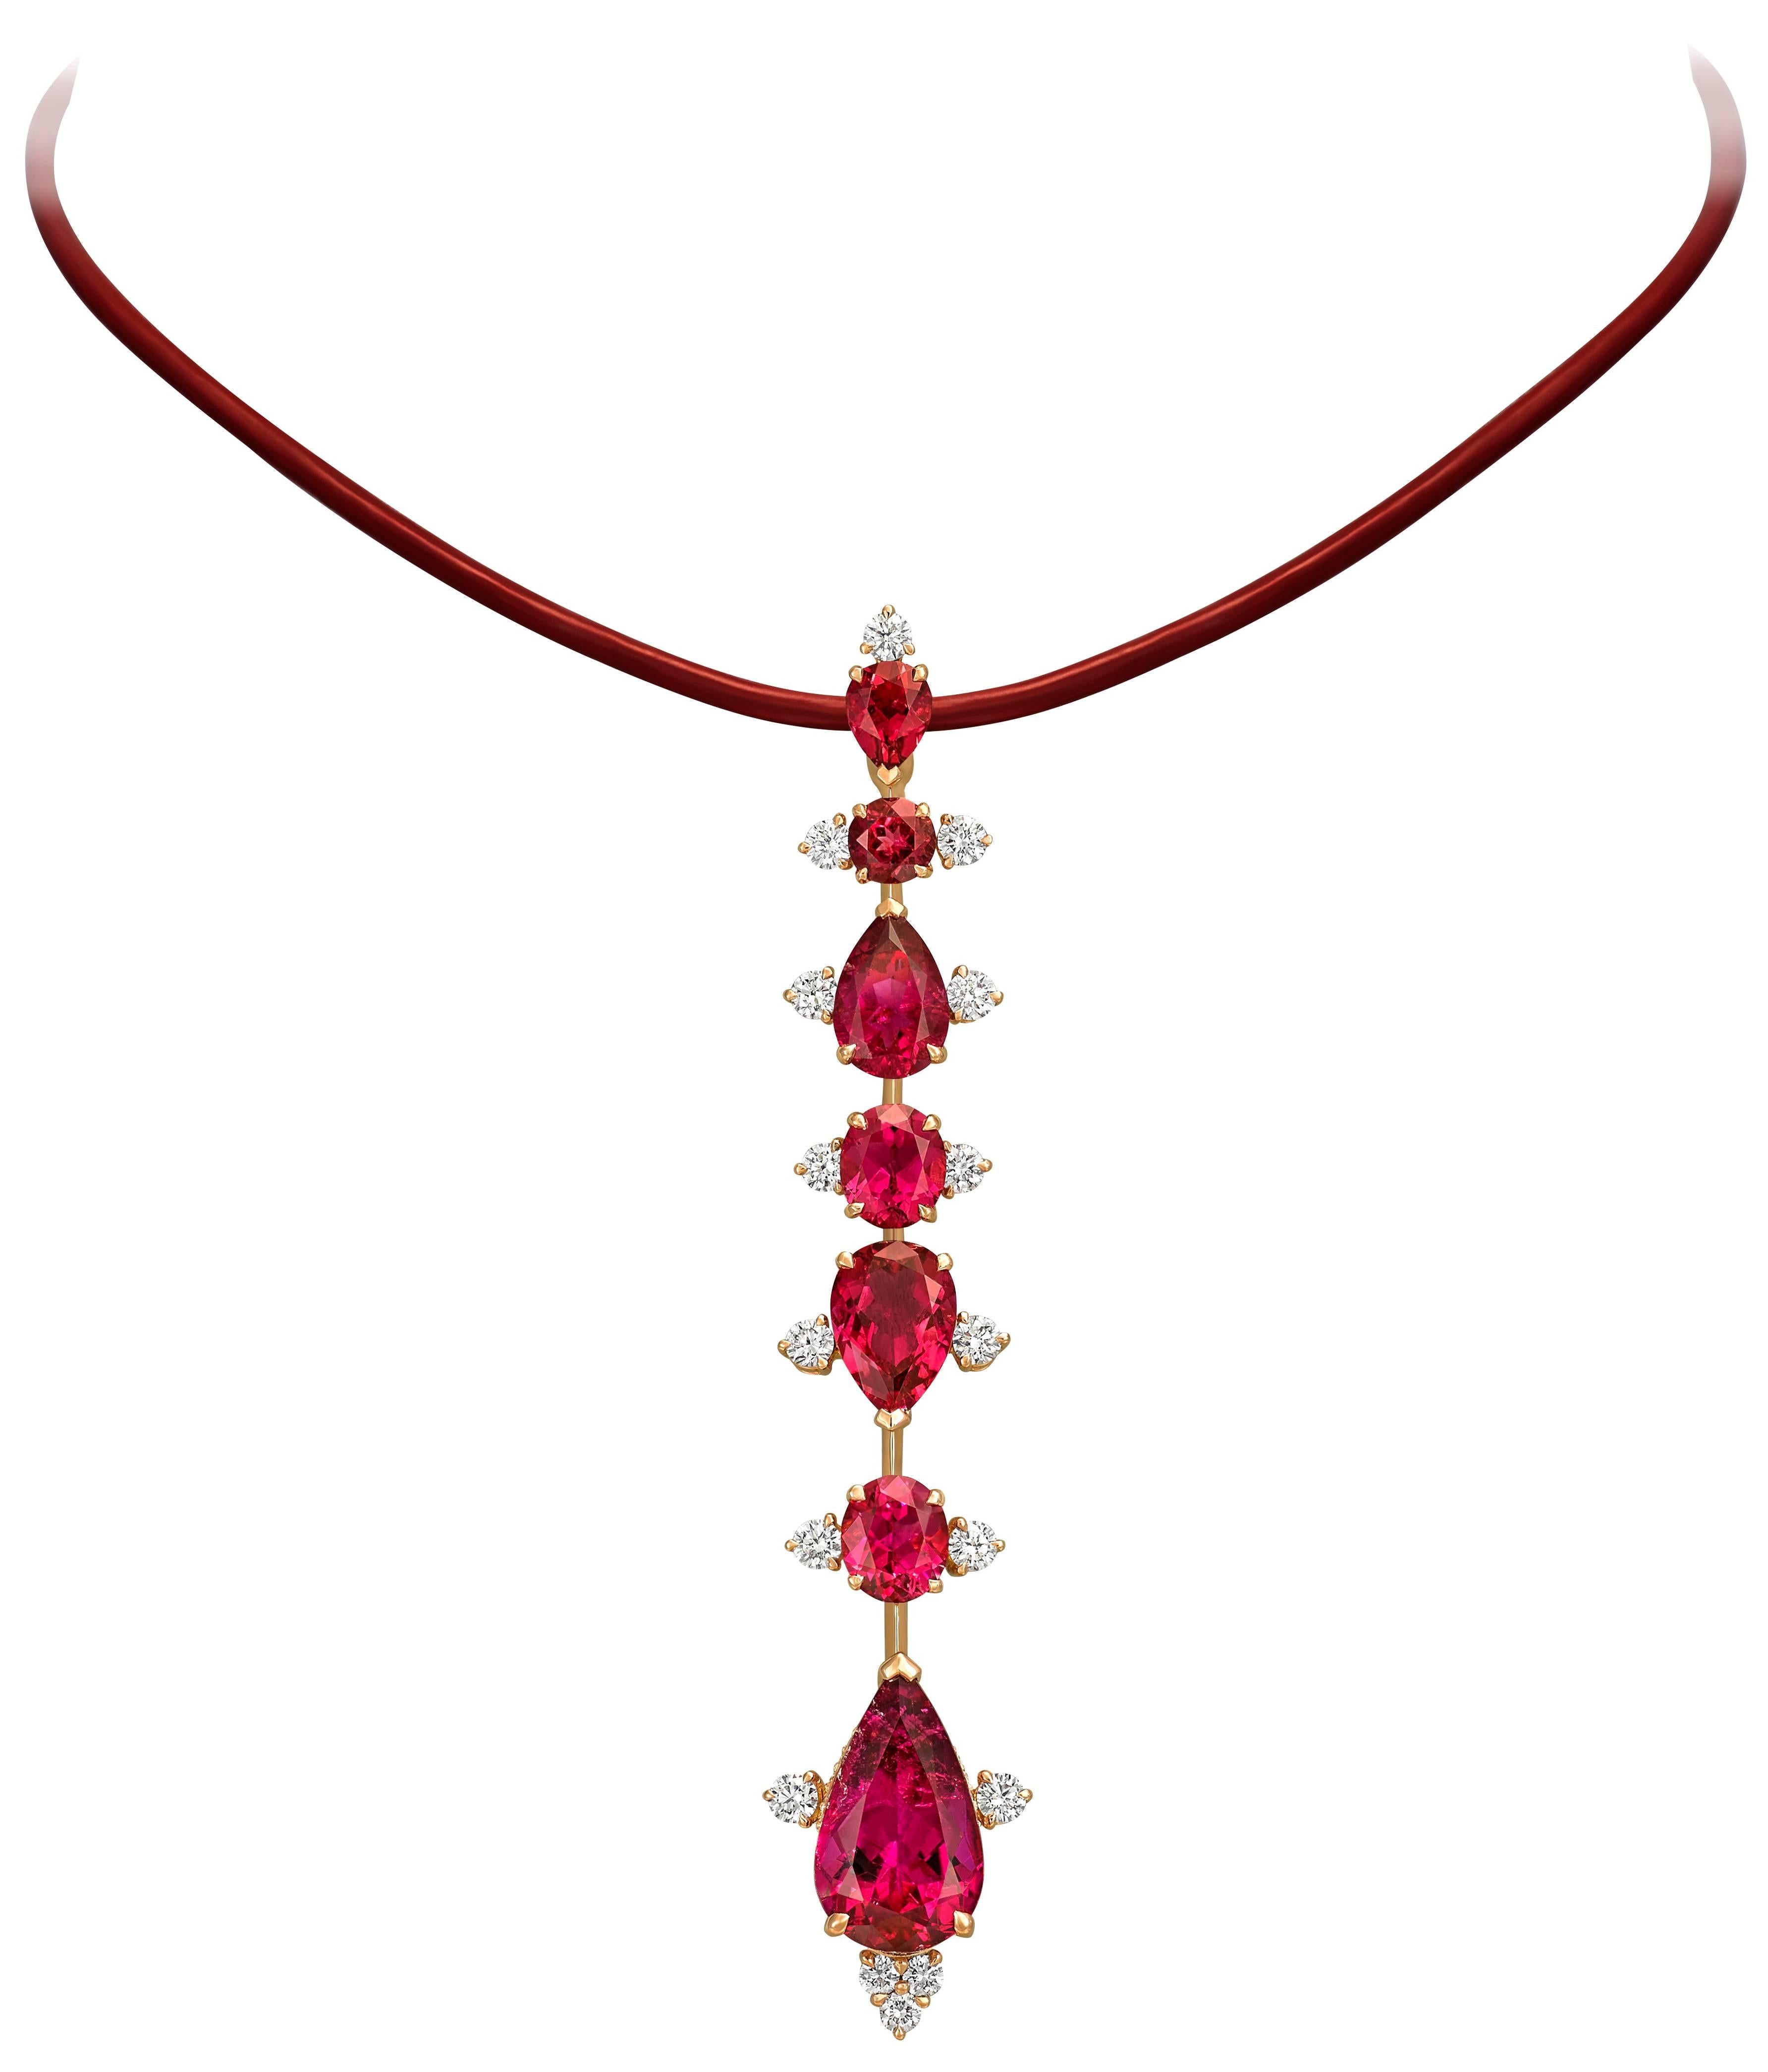 Choker/Necklace crafted in 18K rose gold                                                                                              Mozambican responsibly sourced rubies & rubellites and diamonds                                                  